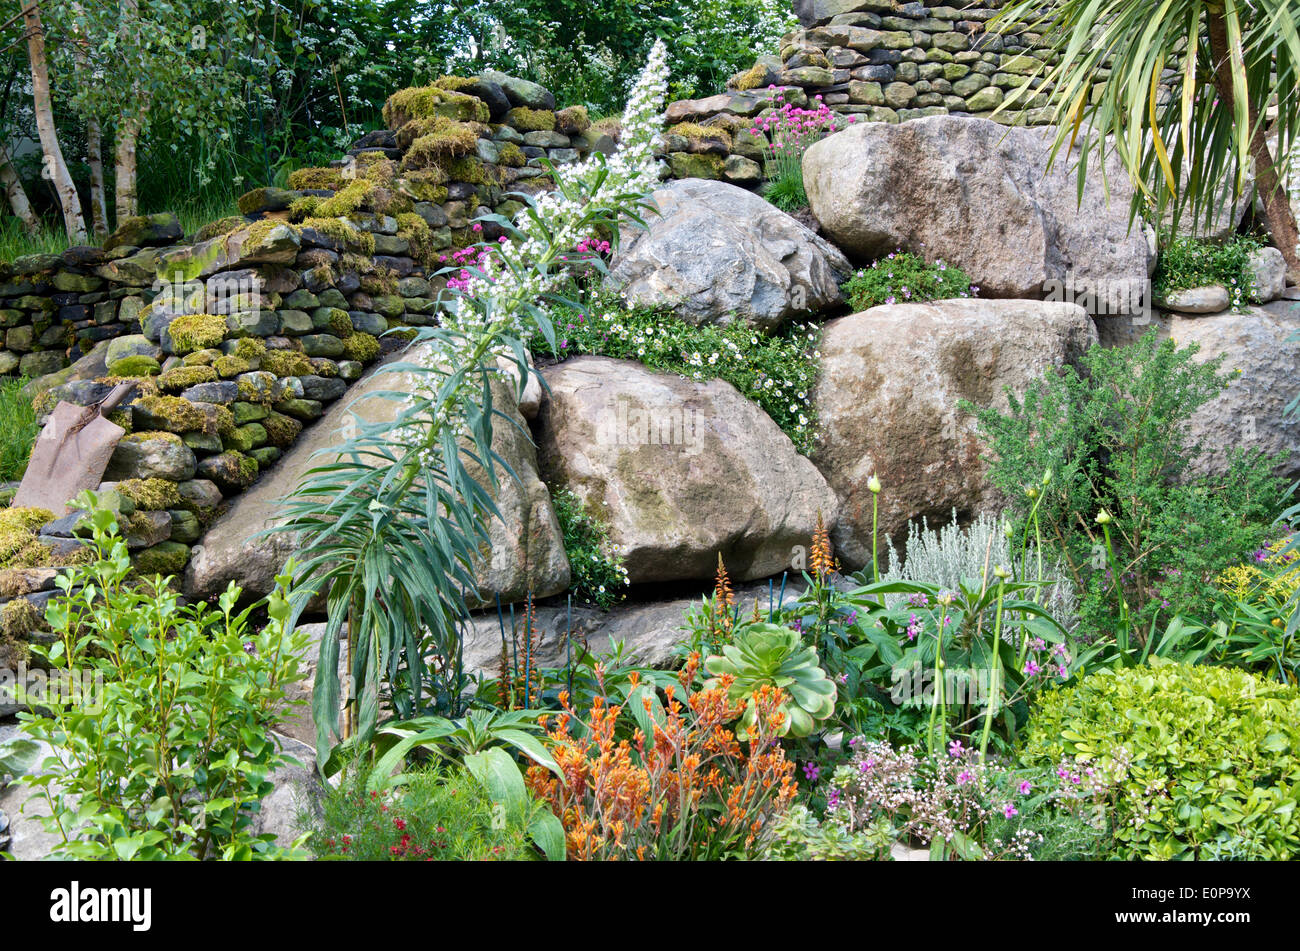 Coastal and rock planting in the garden designed by Alan Titchmarsh in collaboration with Kate Gould. The garden 'From the Moors to the Sea' celebrates 50 years in the horticultural trade for Mr Titchmarsh and the 50th Anniversary of Britain in Bloom. Stock Photo